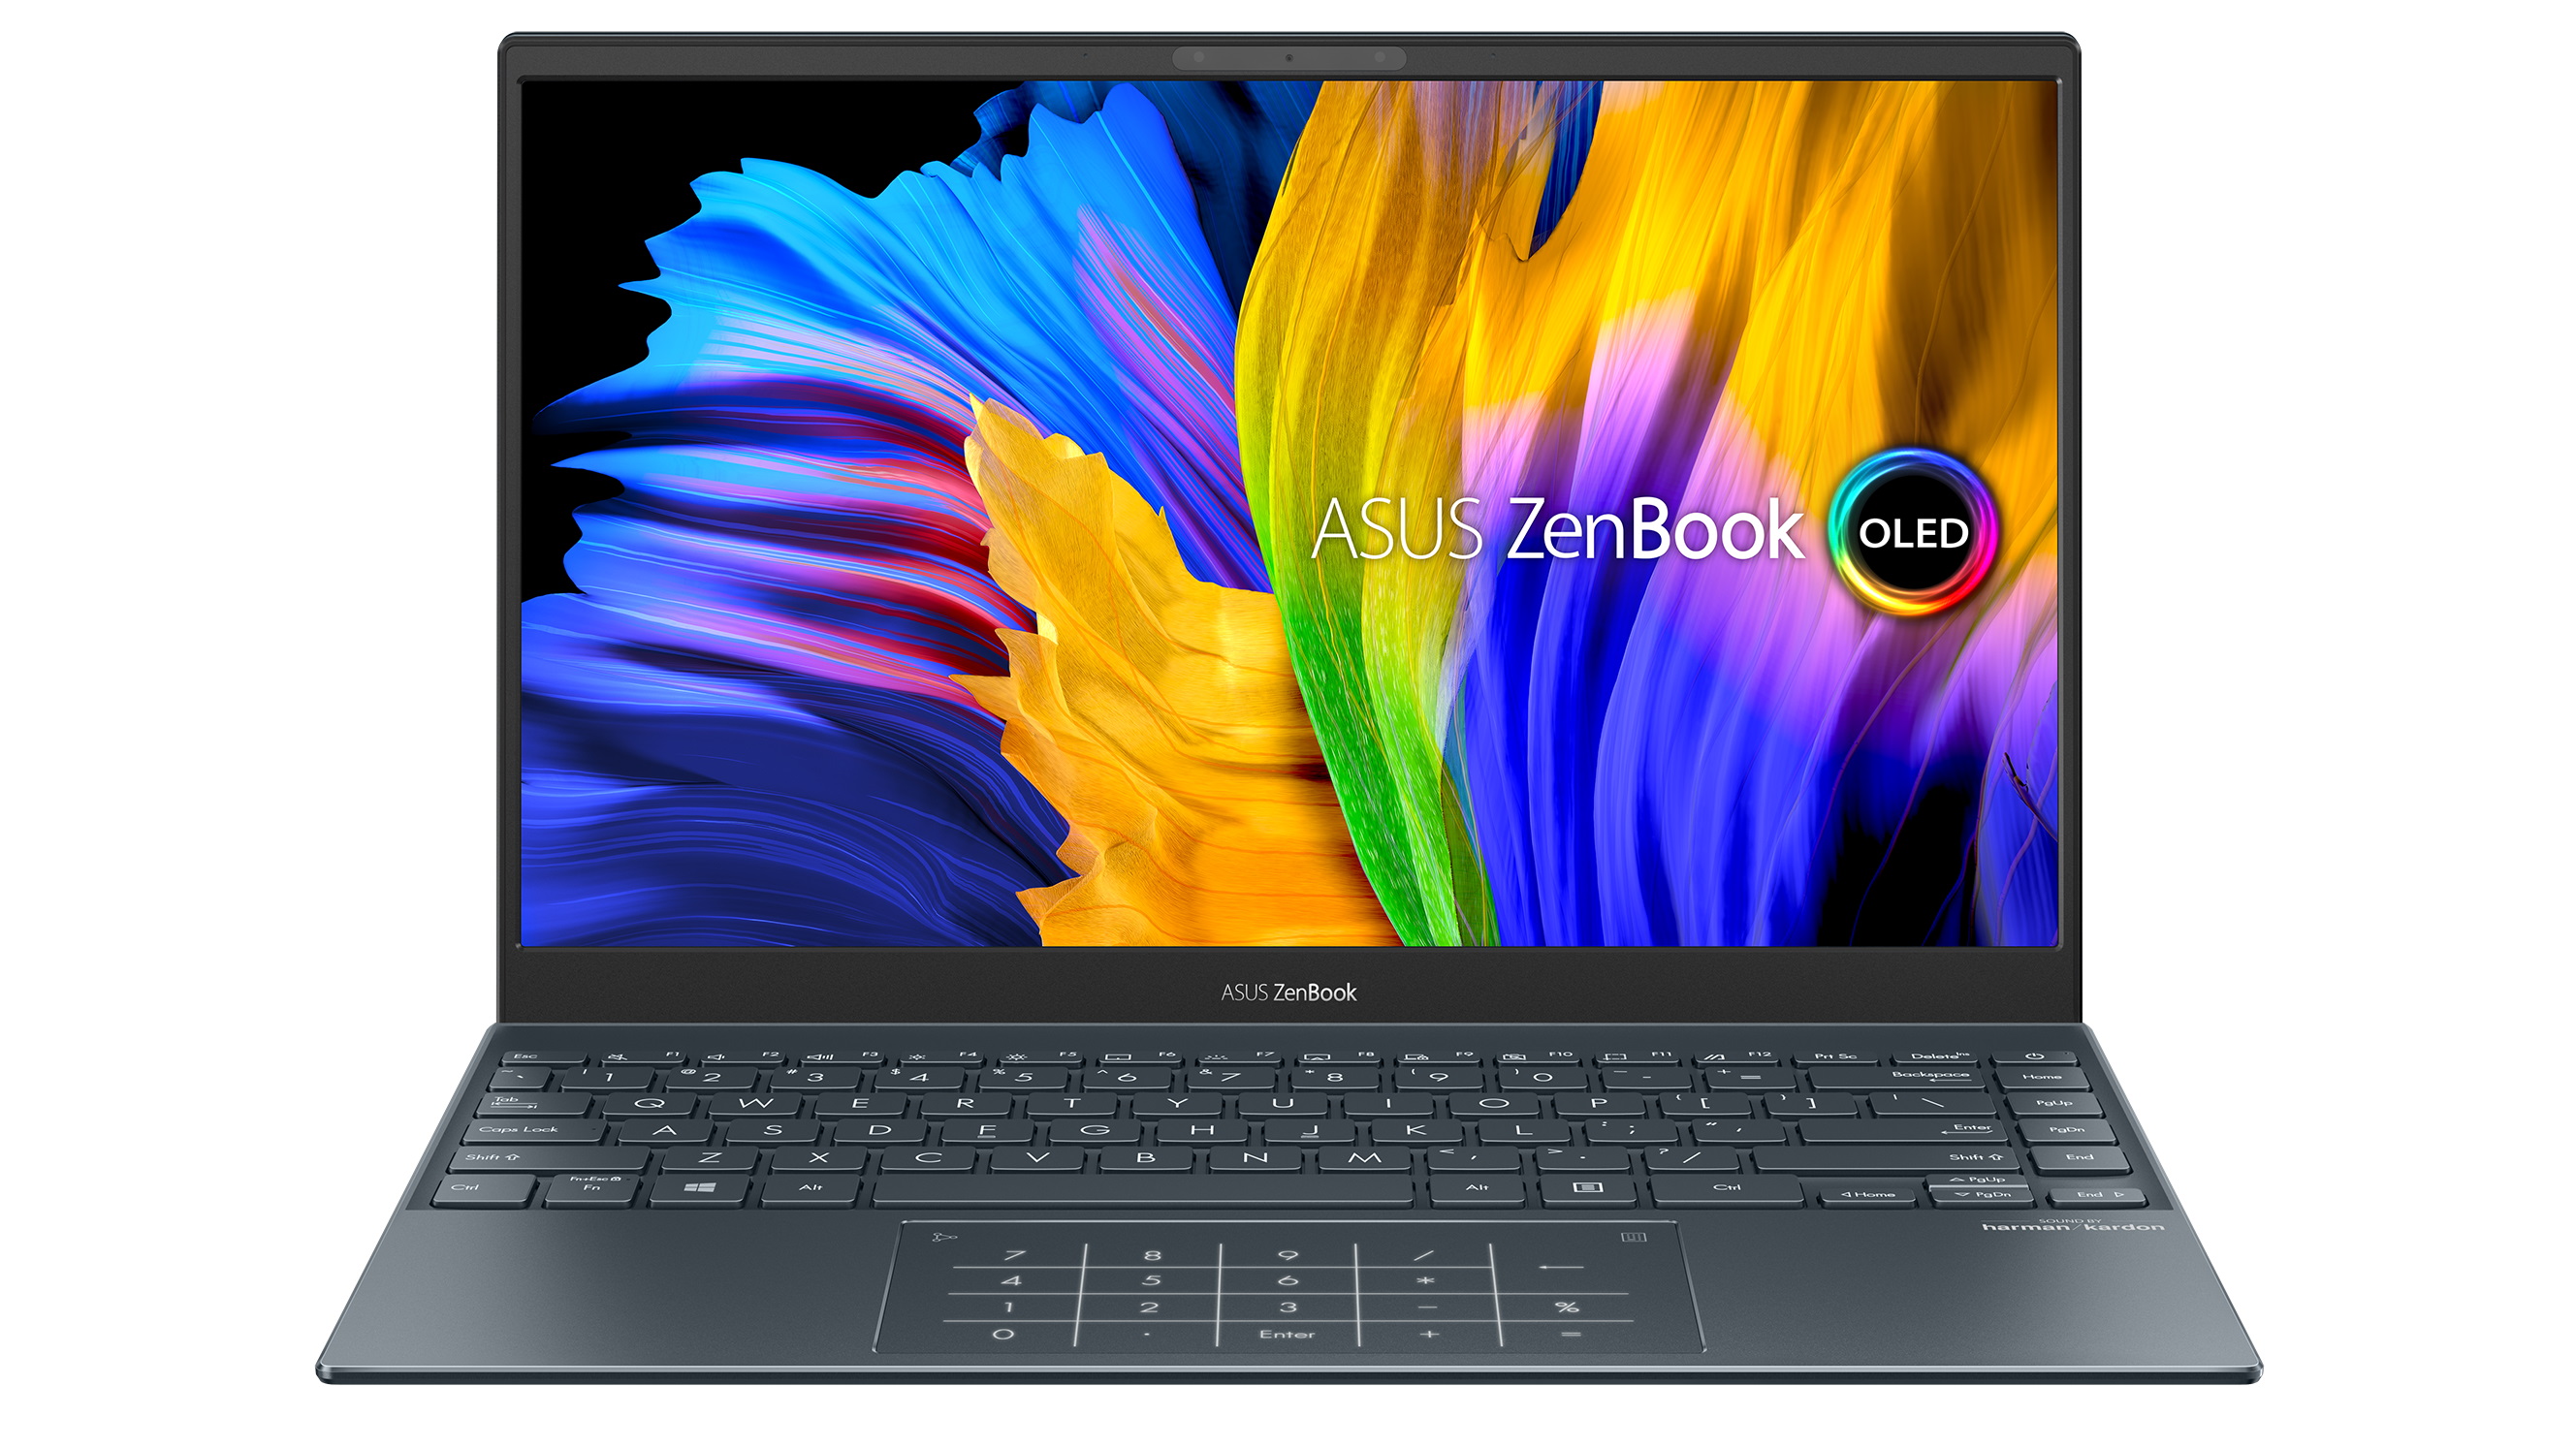 Asus ZenBook 13 (2021) laptop with screen open on white background